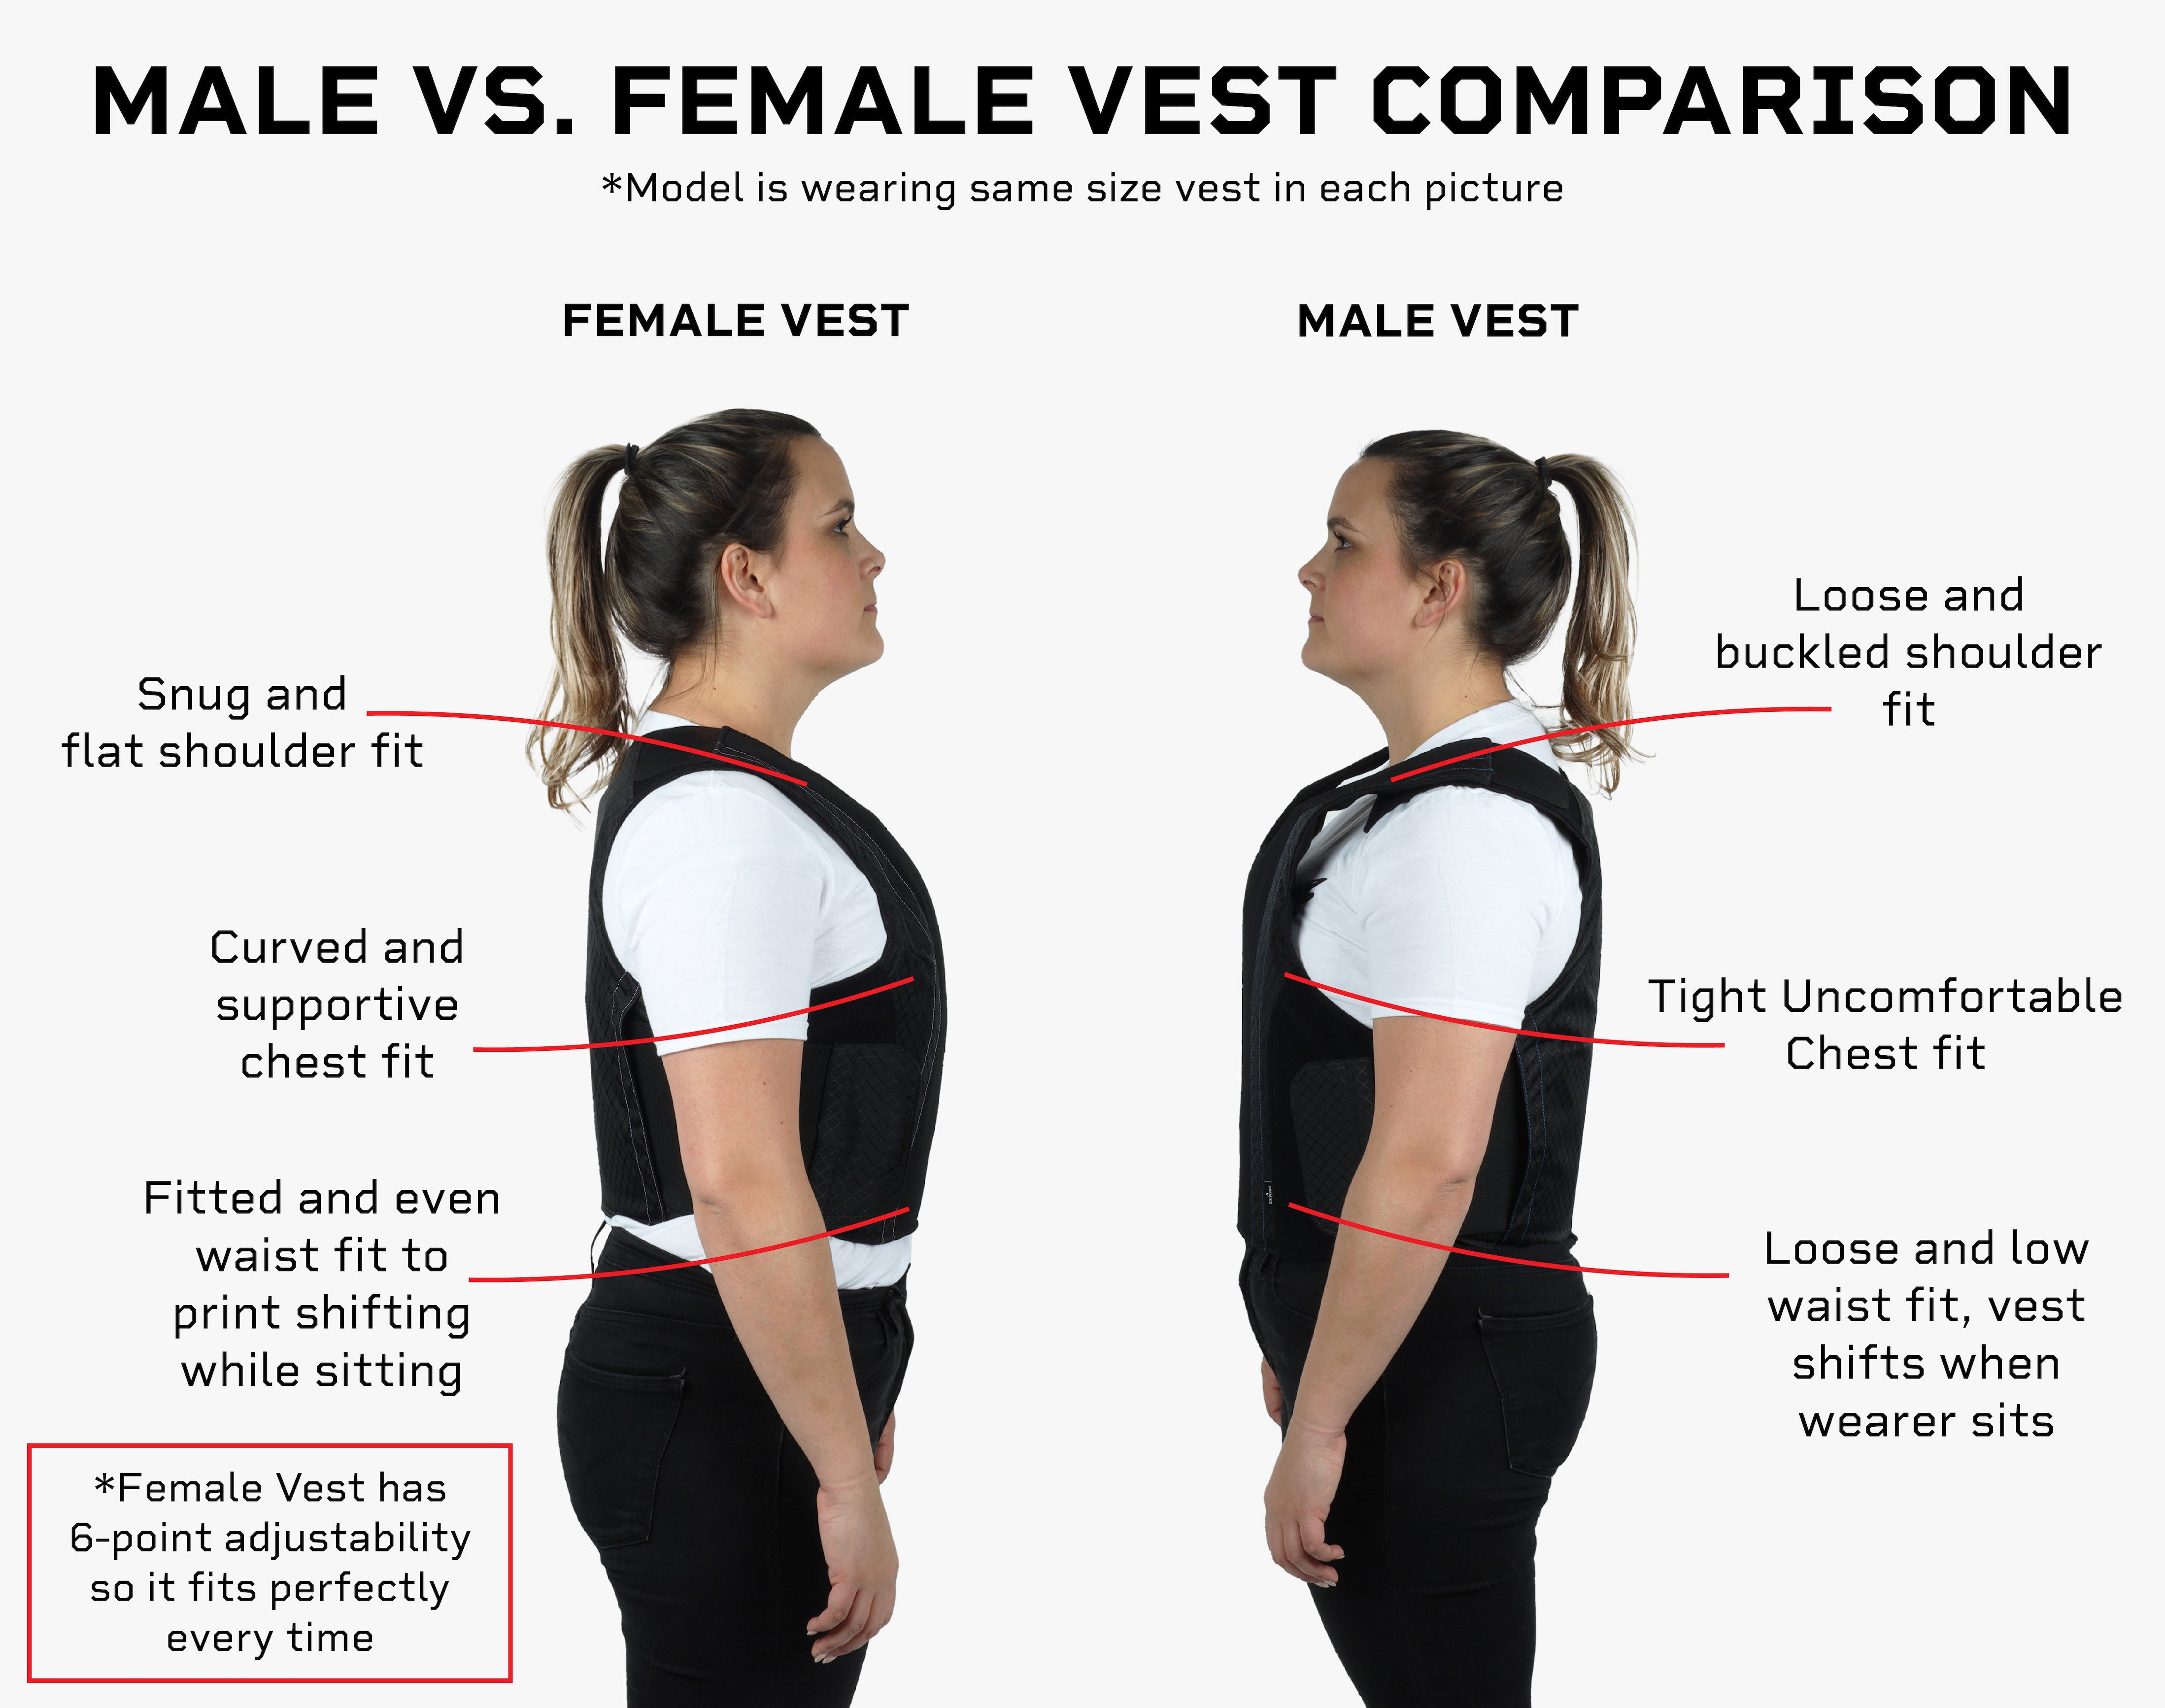 Comparison of chest depth and chest width among males and females